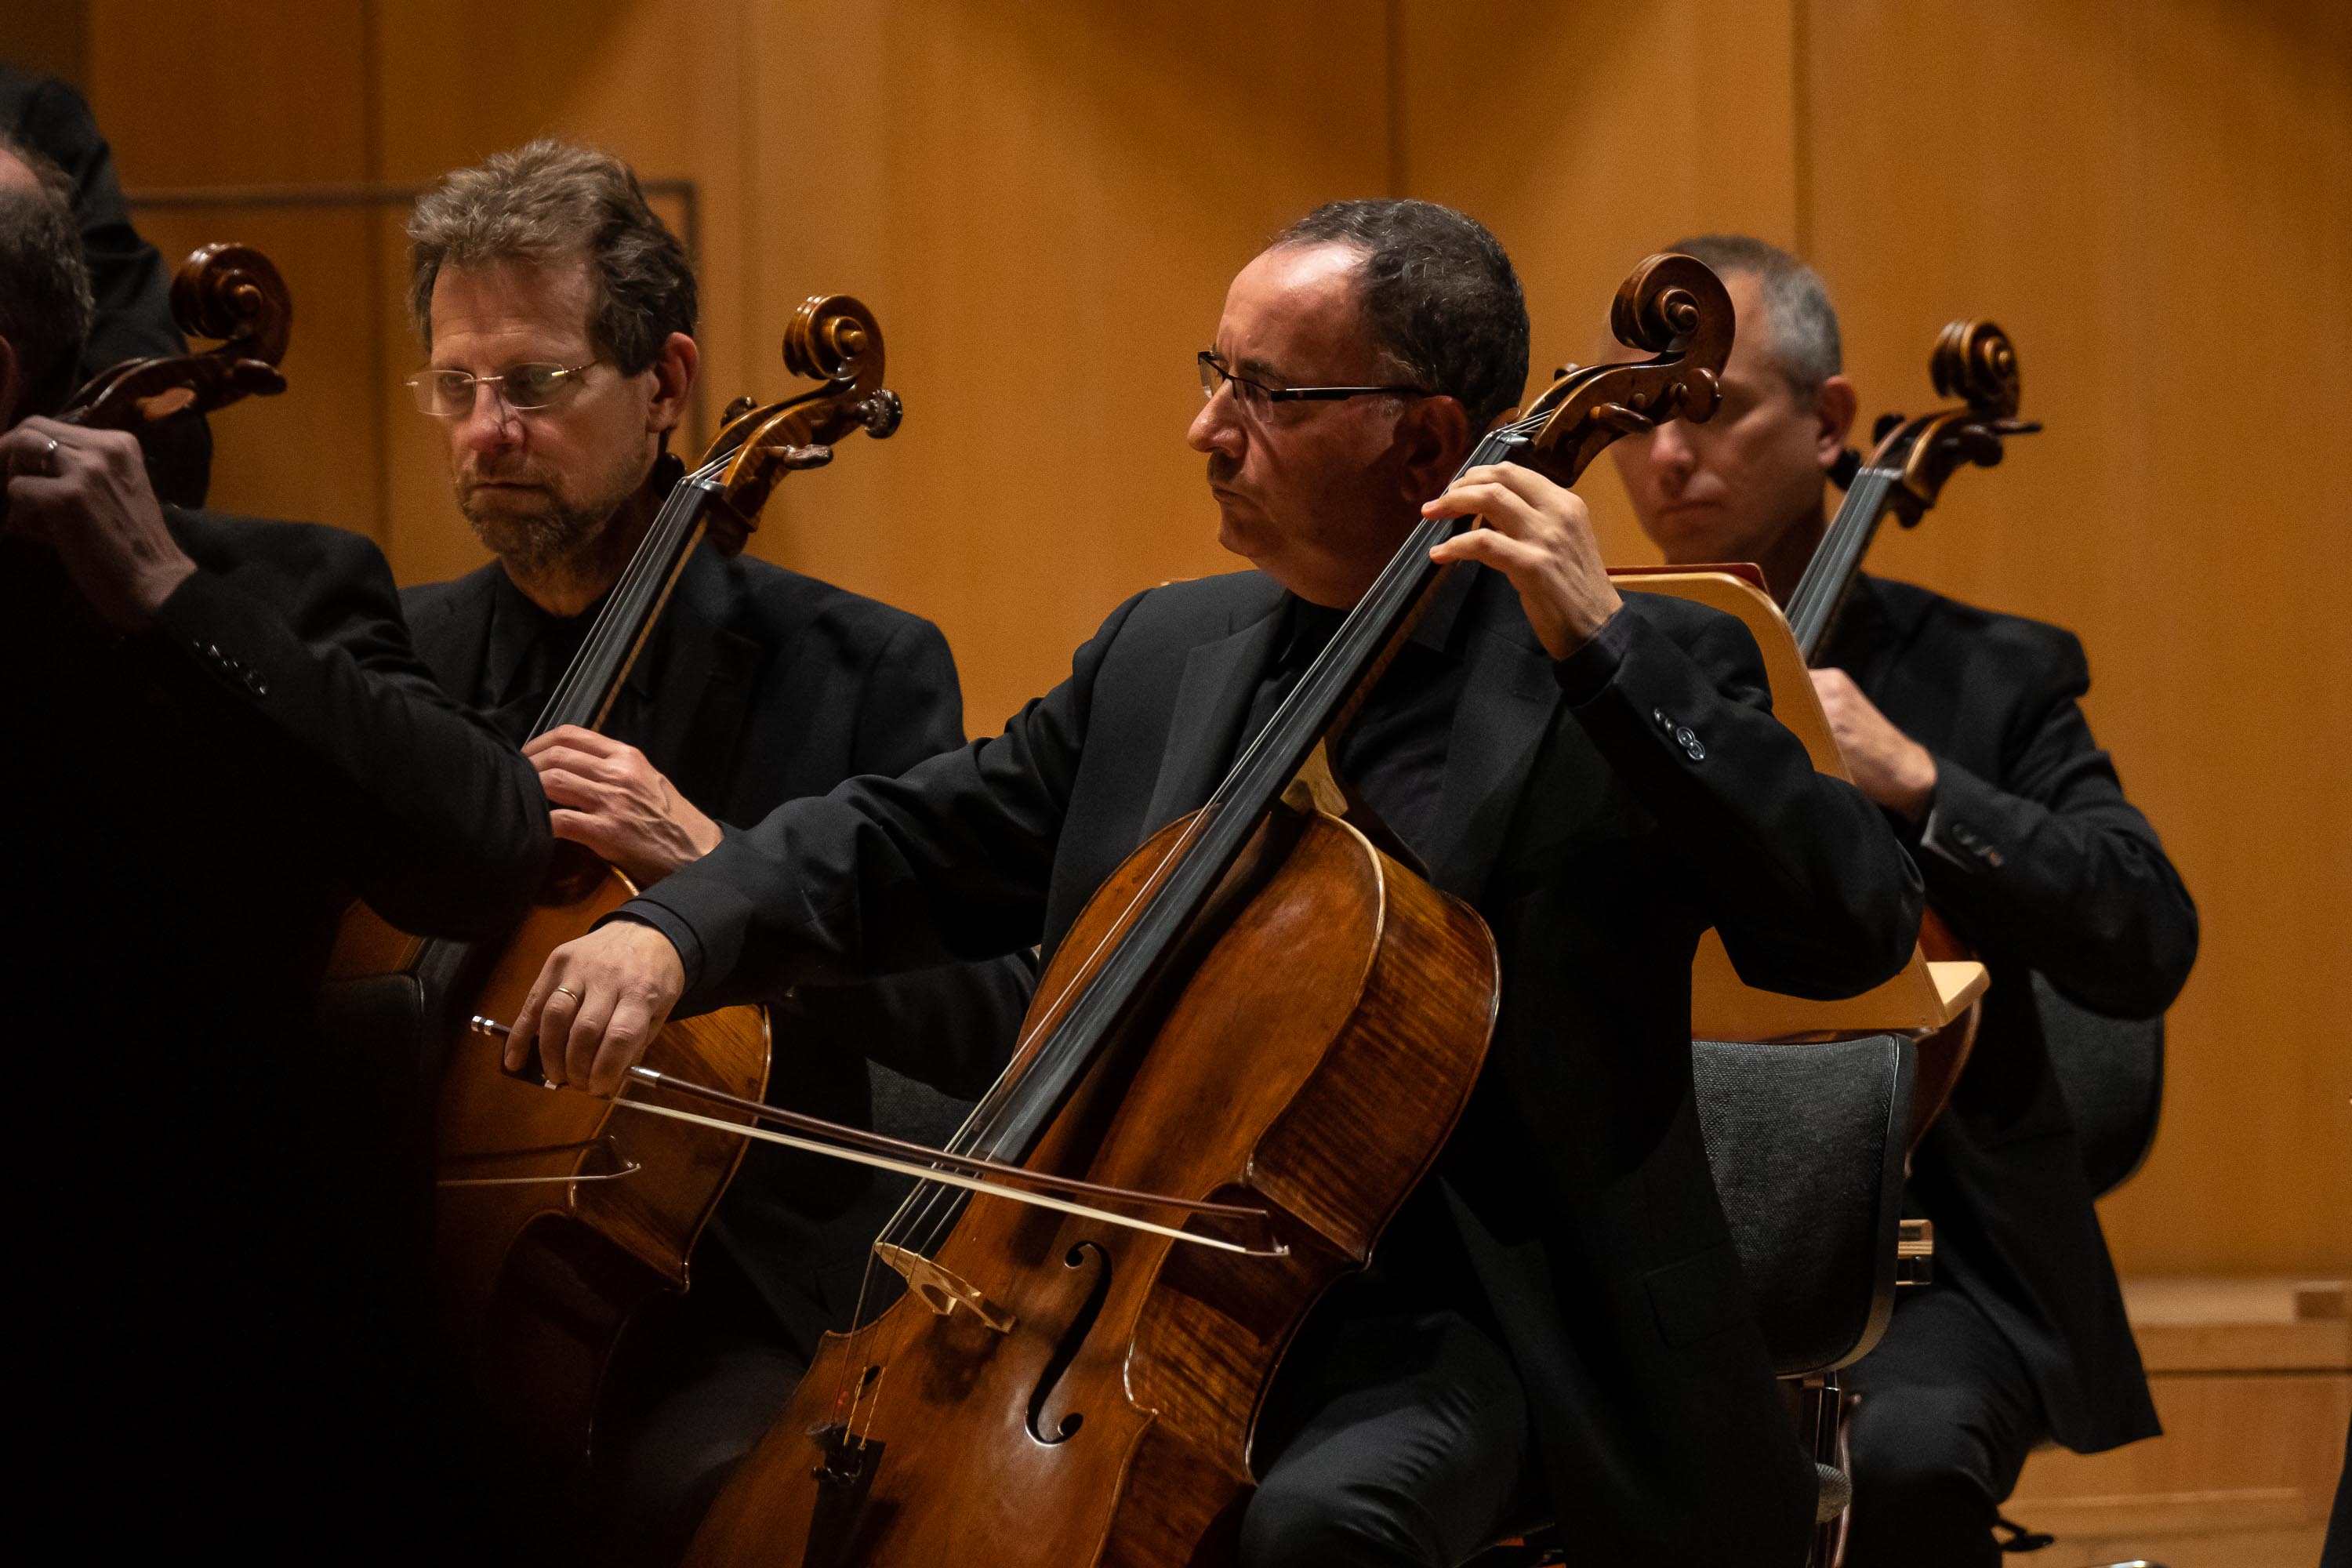 Cellists Robert Cafaro and Ohad Bar-David during the Chausson